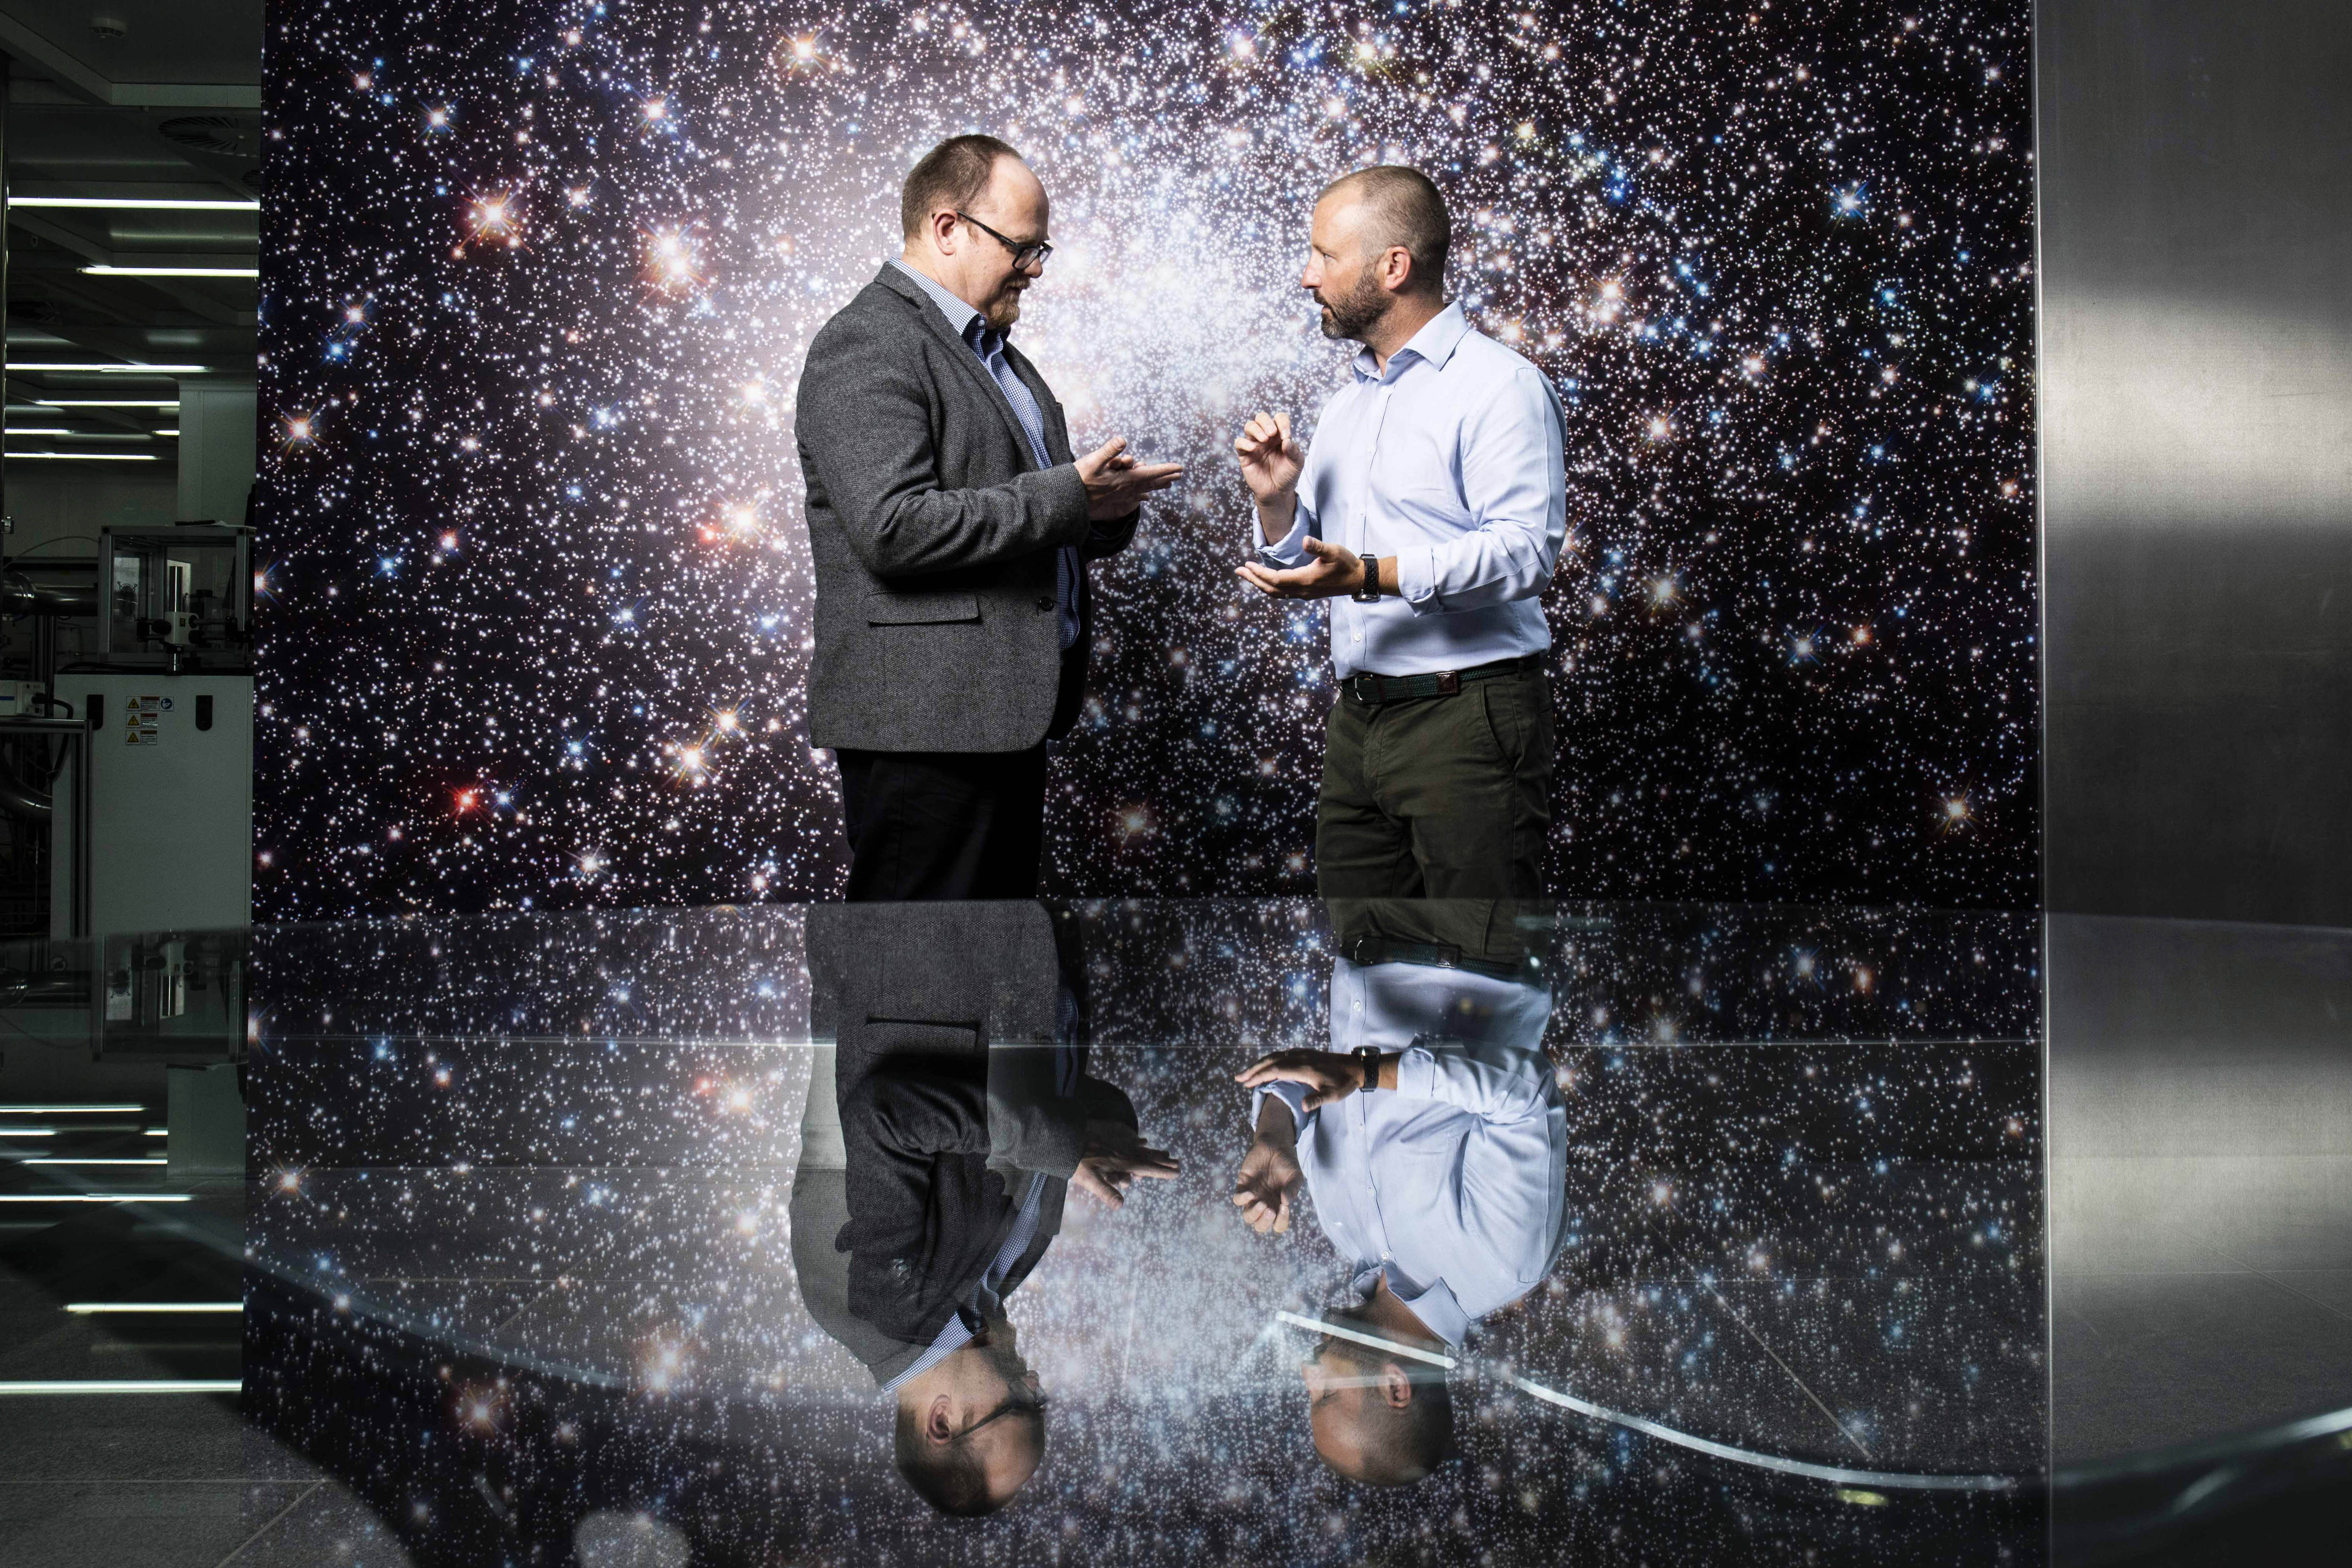 Two men stand talking in a boardroom surrounded by stars.